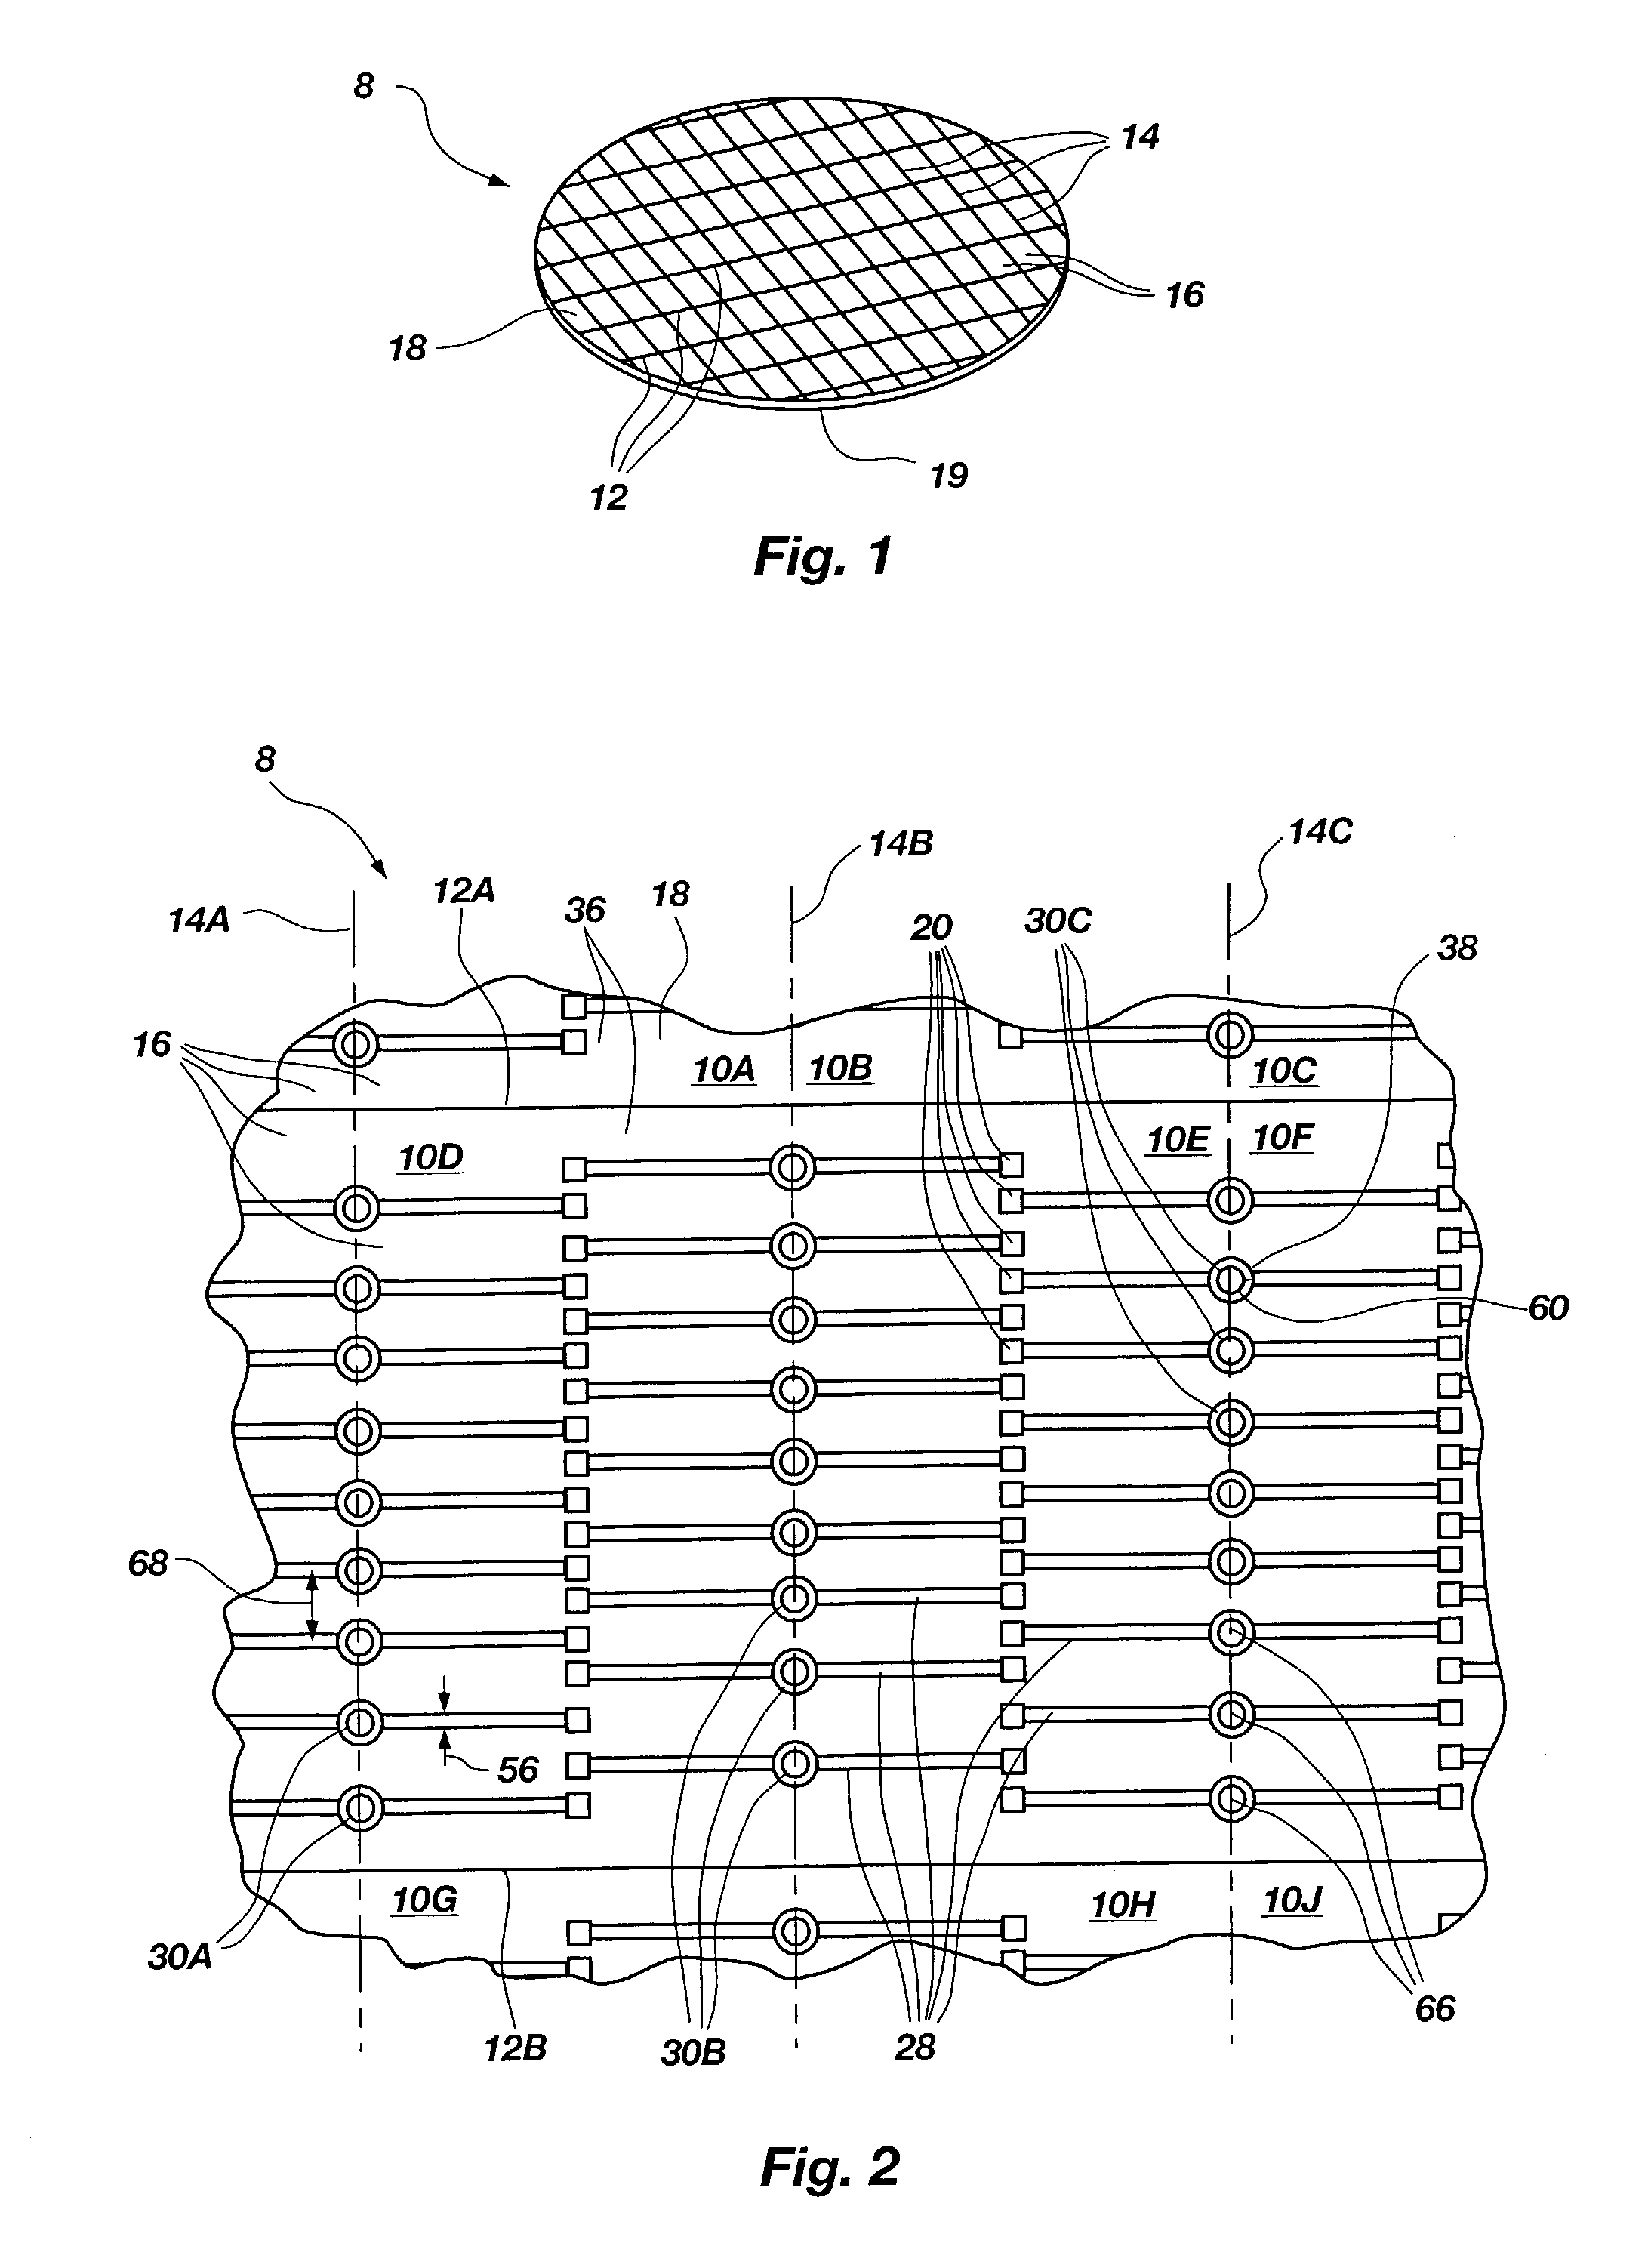 Semiconductor devices and semiconductor device components with peripherally located, castellated contacts, assemblies and packages including such semiconductor devices or packages and associated methods